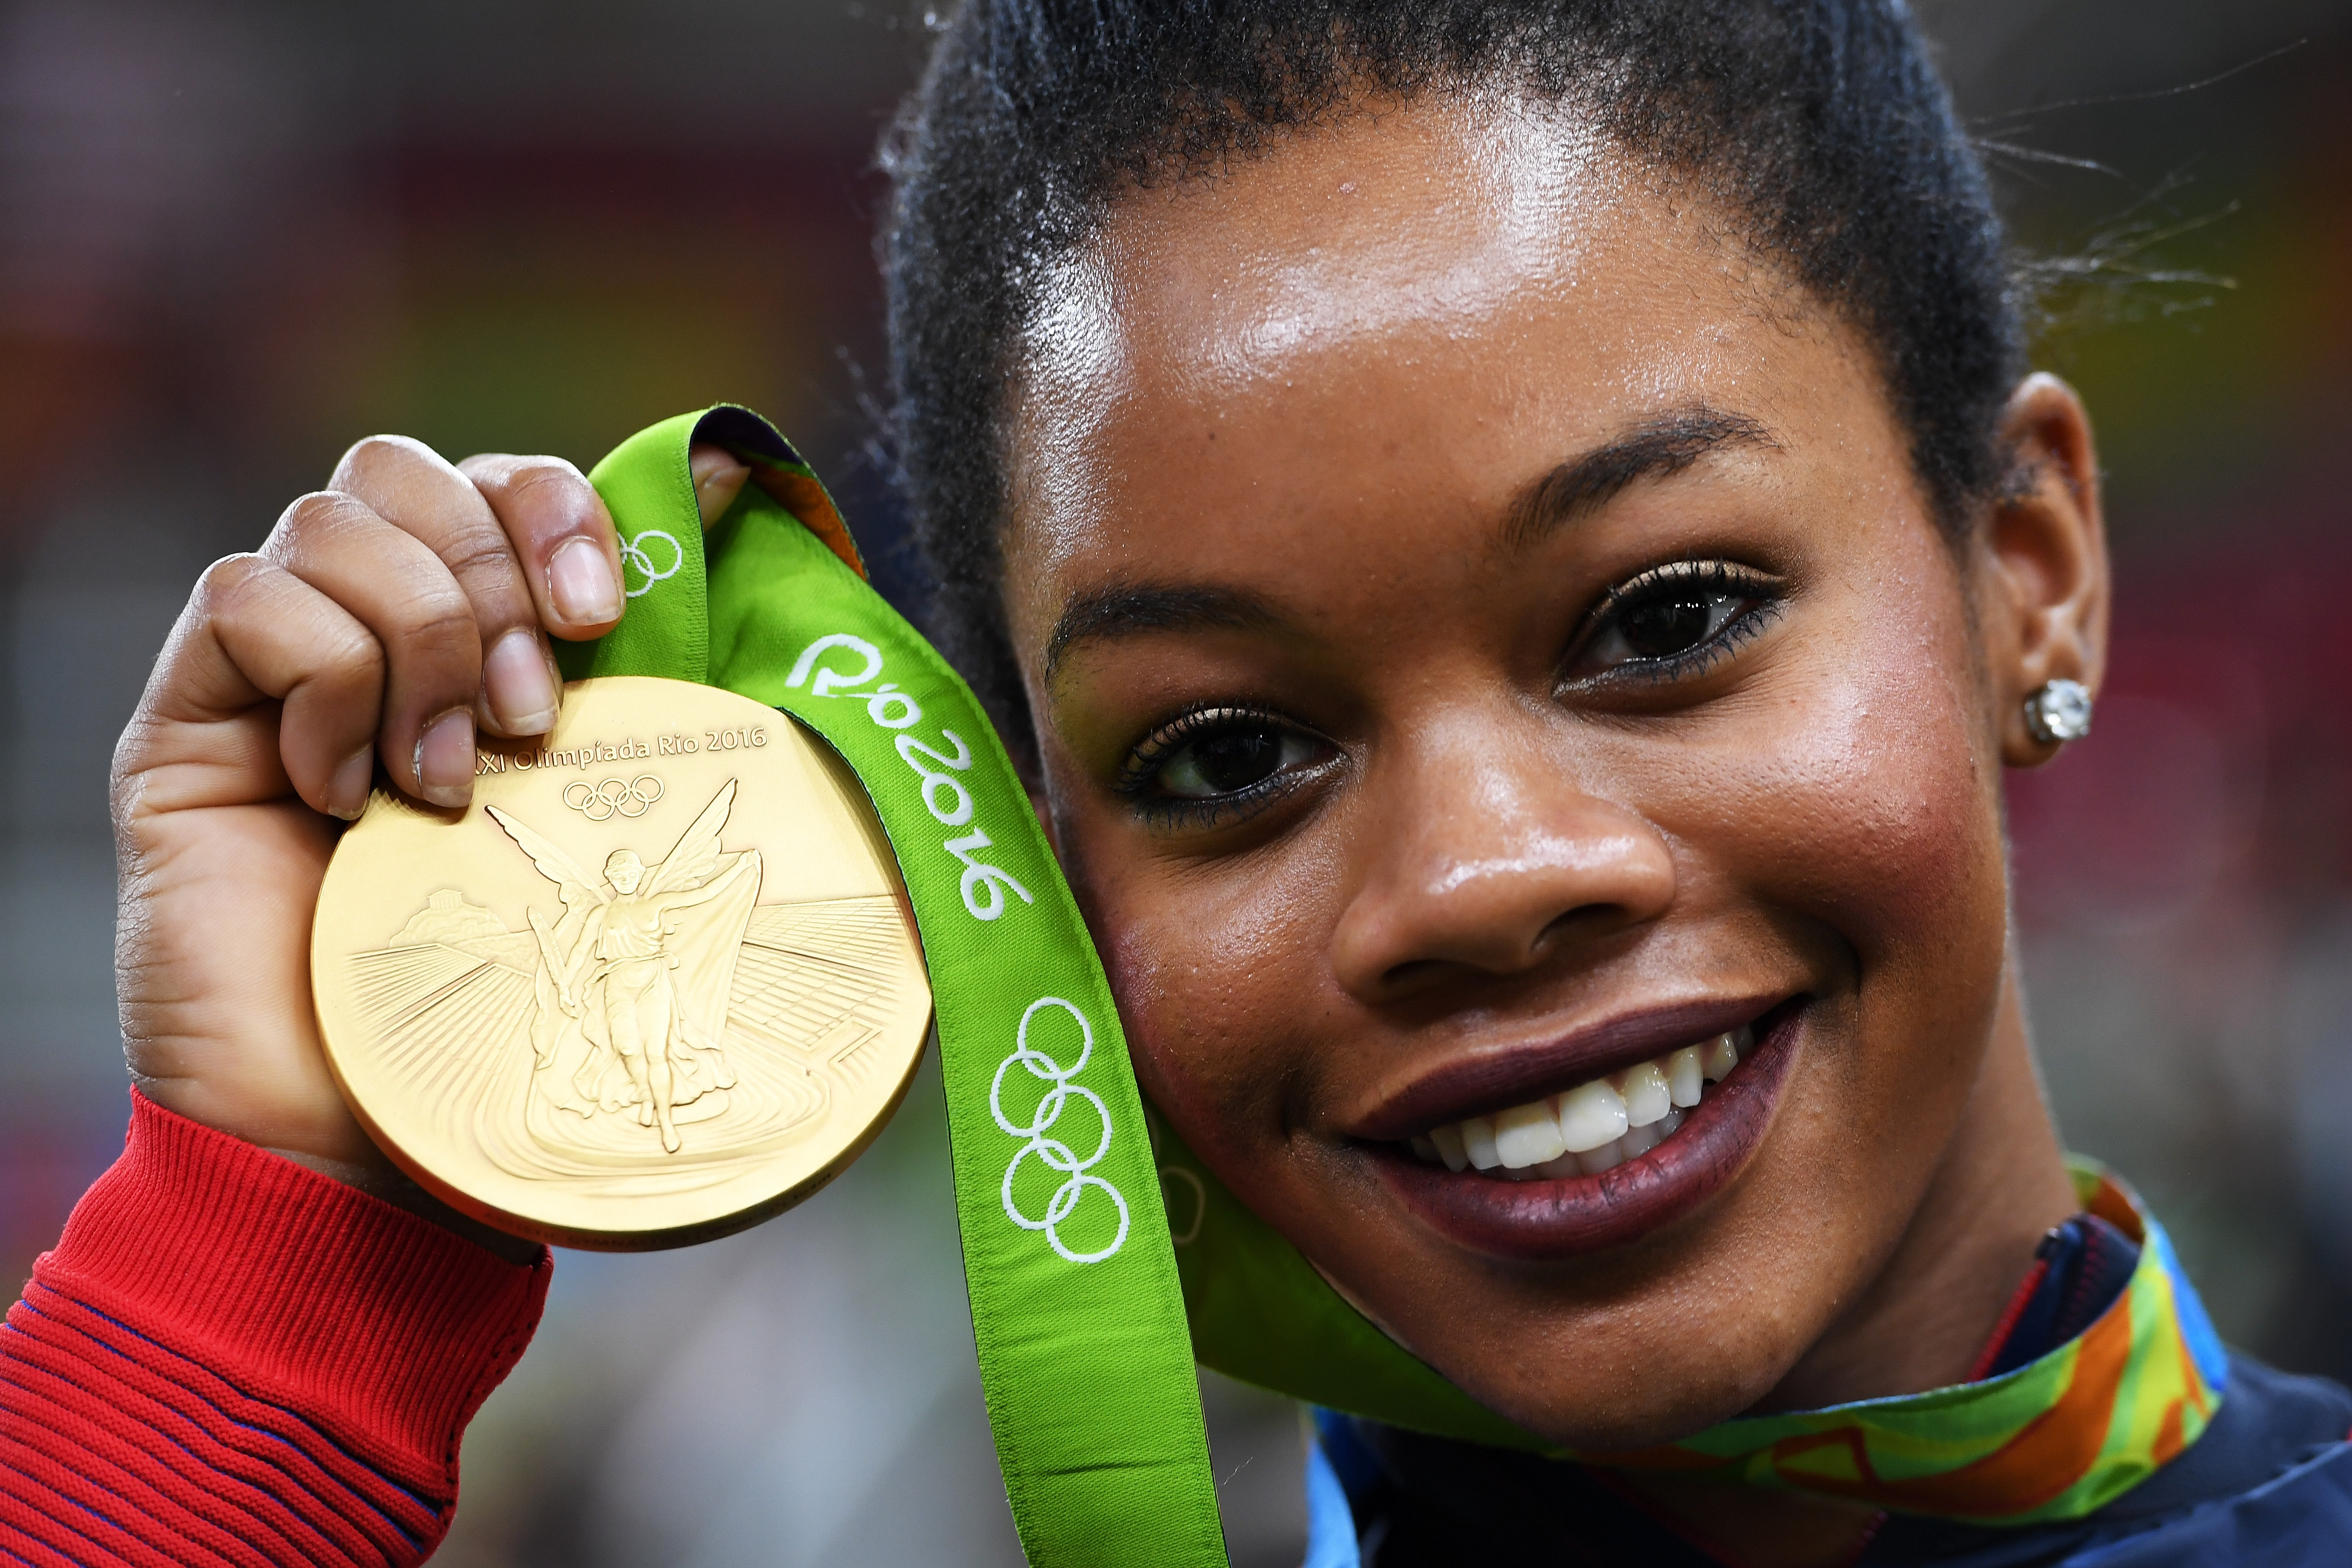 Gabrielle Douglas at the Rio Olympic Arena on August 9, 2016 in Rio de Janeiro, Brazil | Source: Getty Images